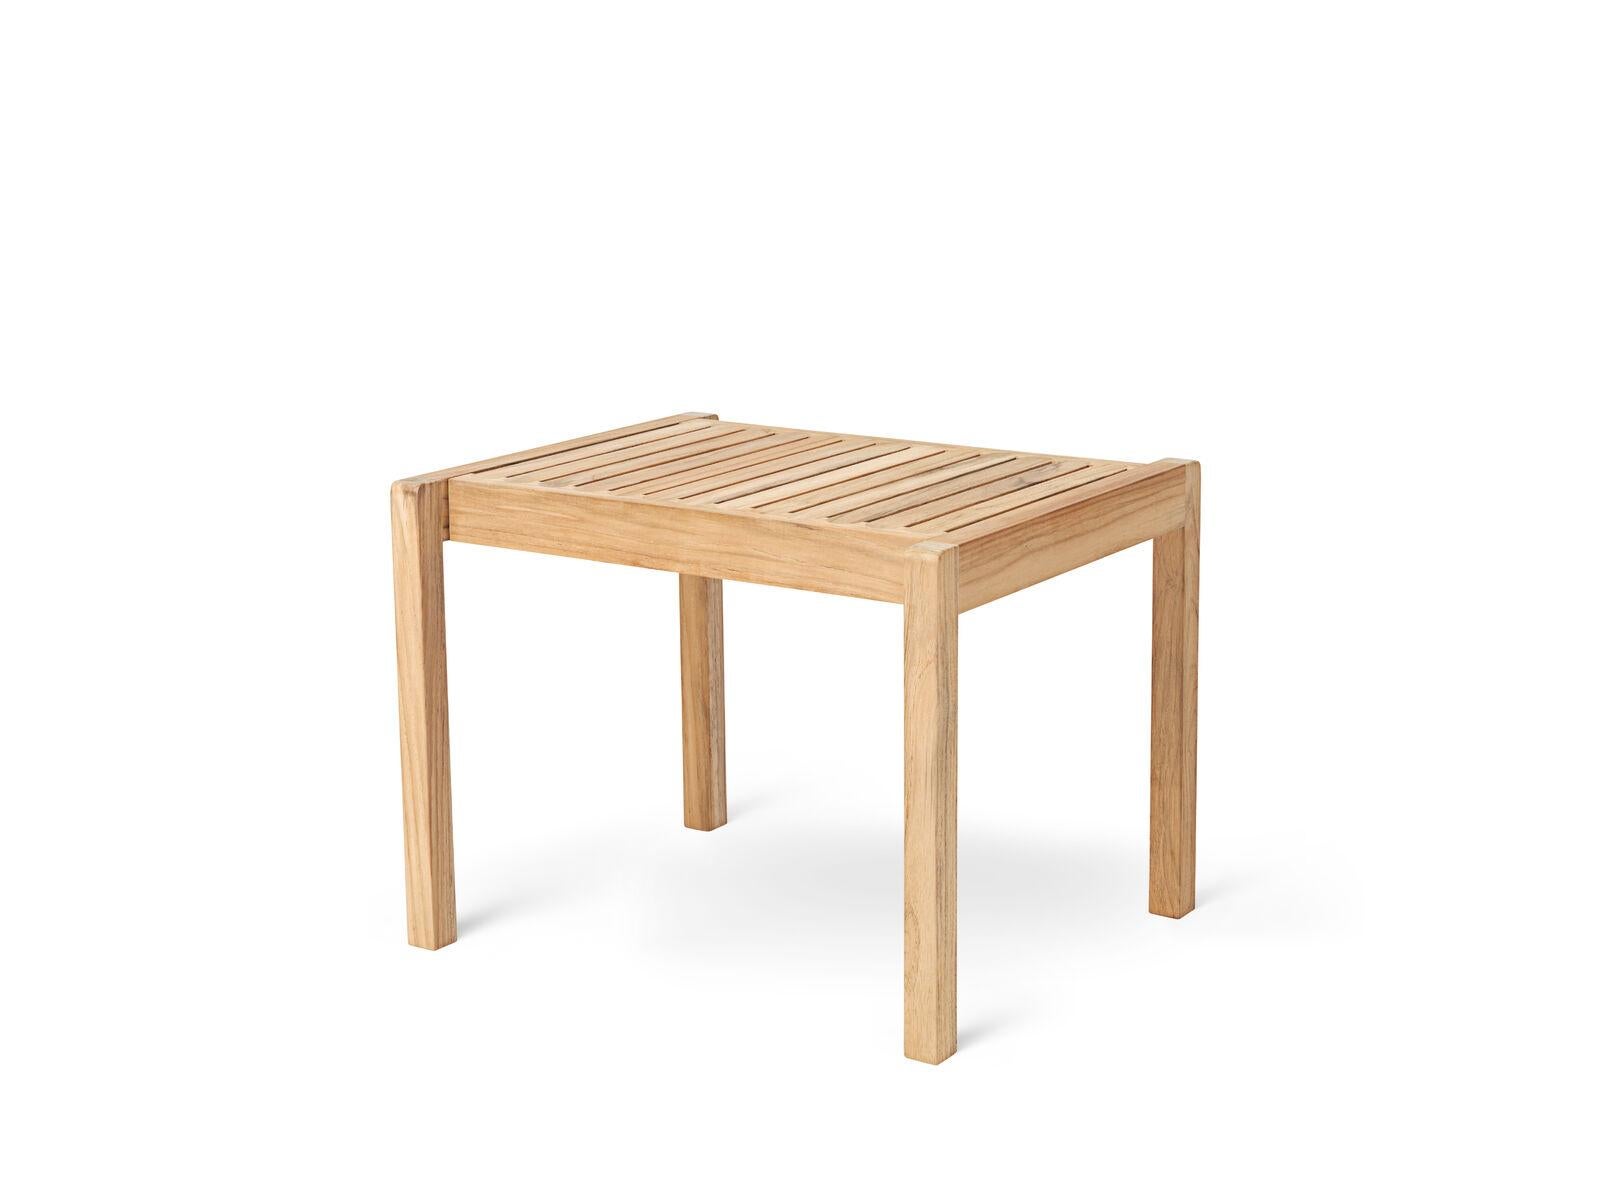 The AH911 Outdoor Side table was designed by Alfred Homann in 2022 as part of the AH Outdoor series. With strict lines elegantly combined with soft, rounded details, the table has simplicity and multiple functions - either as a seat or as a counter.